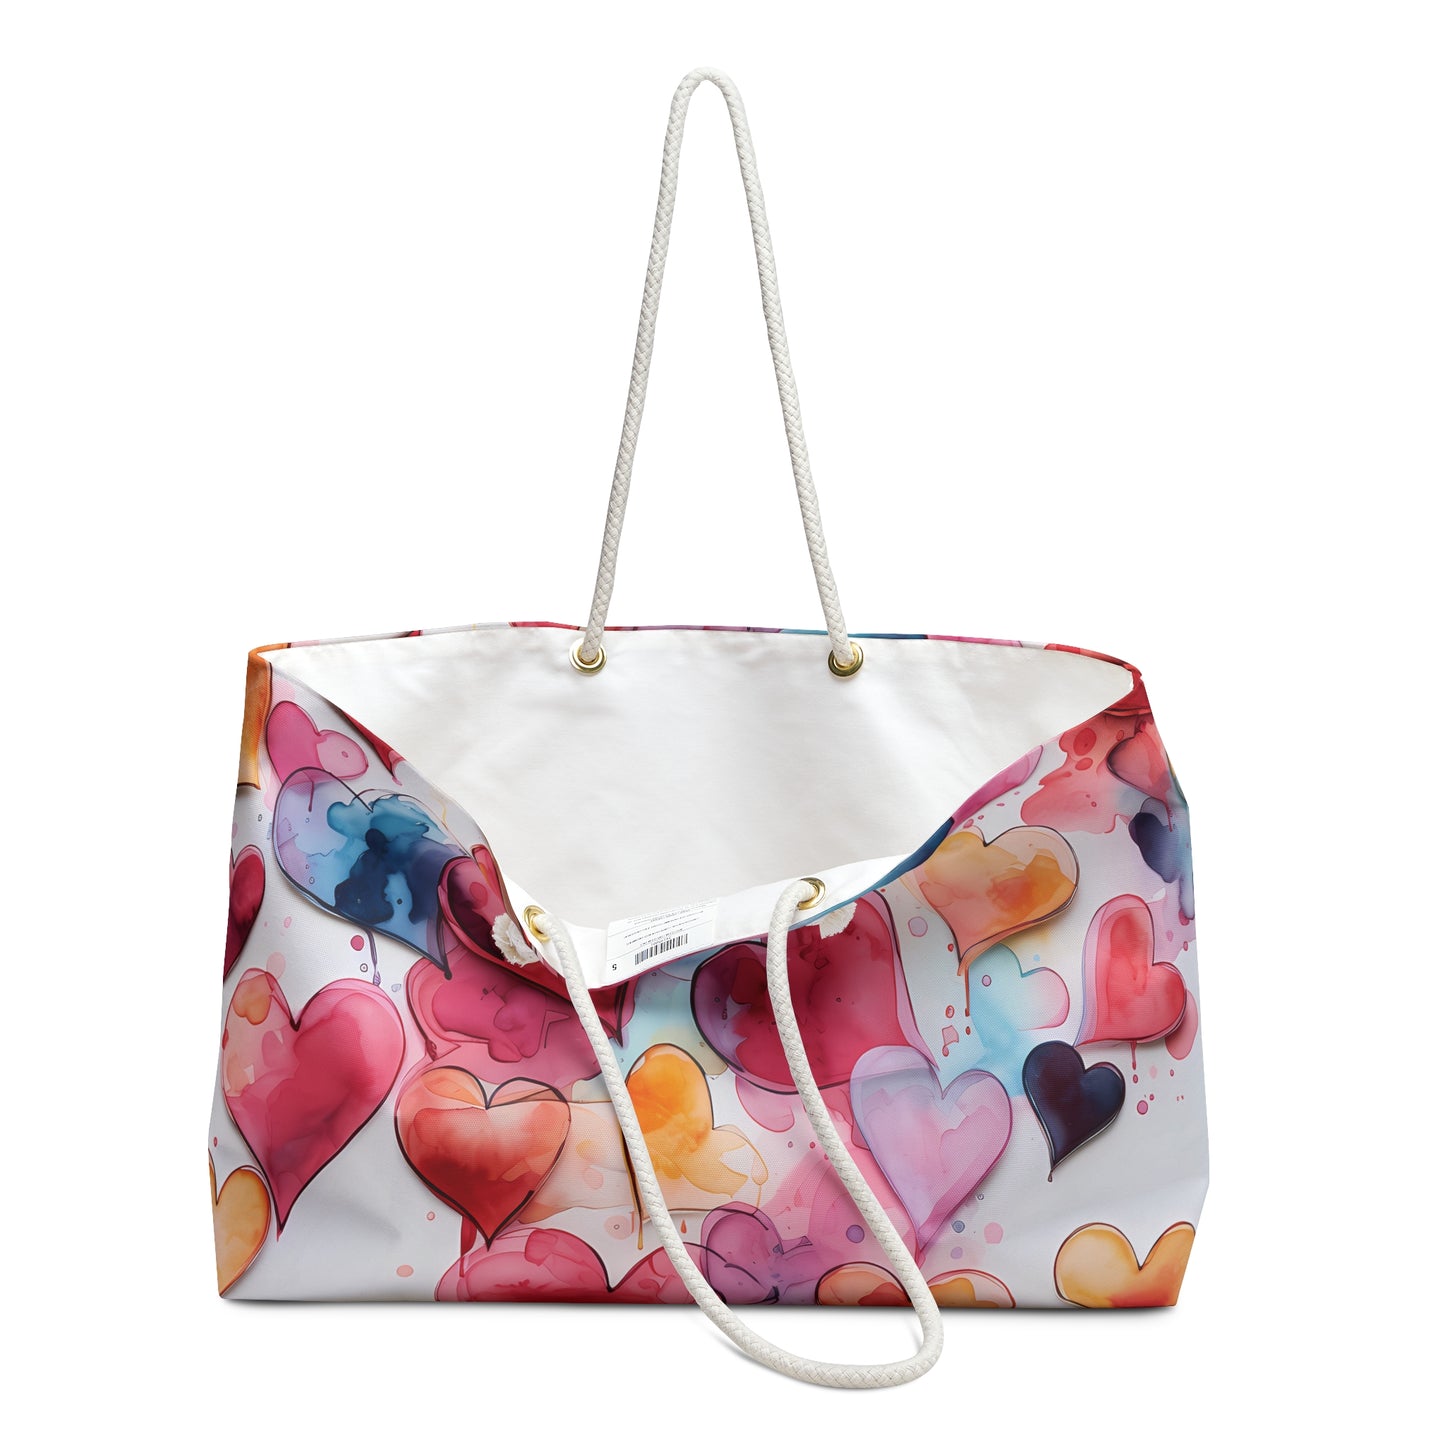 Beautiful Weekender Bag - Watercolor Painted Hearts Design - Perfect for the gym, beach, dance class, bridesmaid or sleepovers!